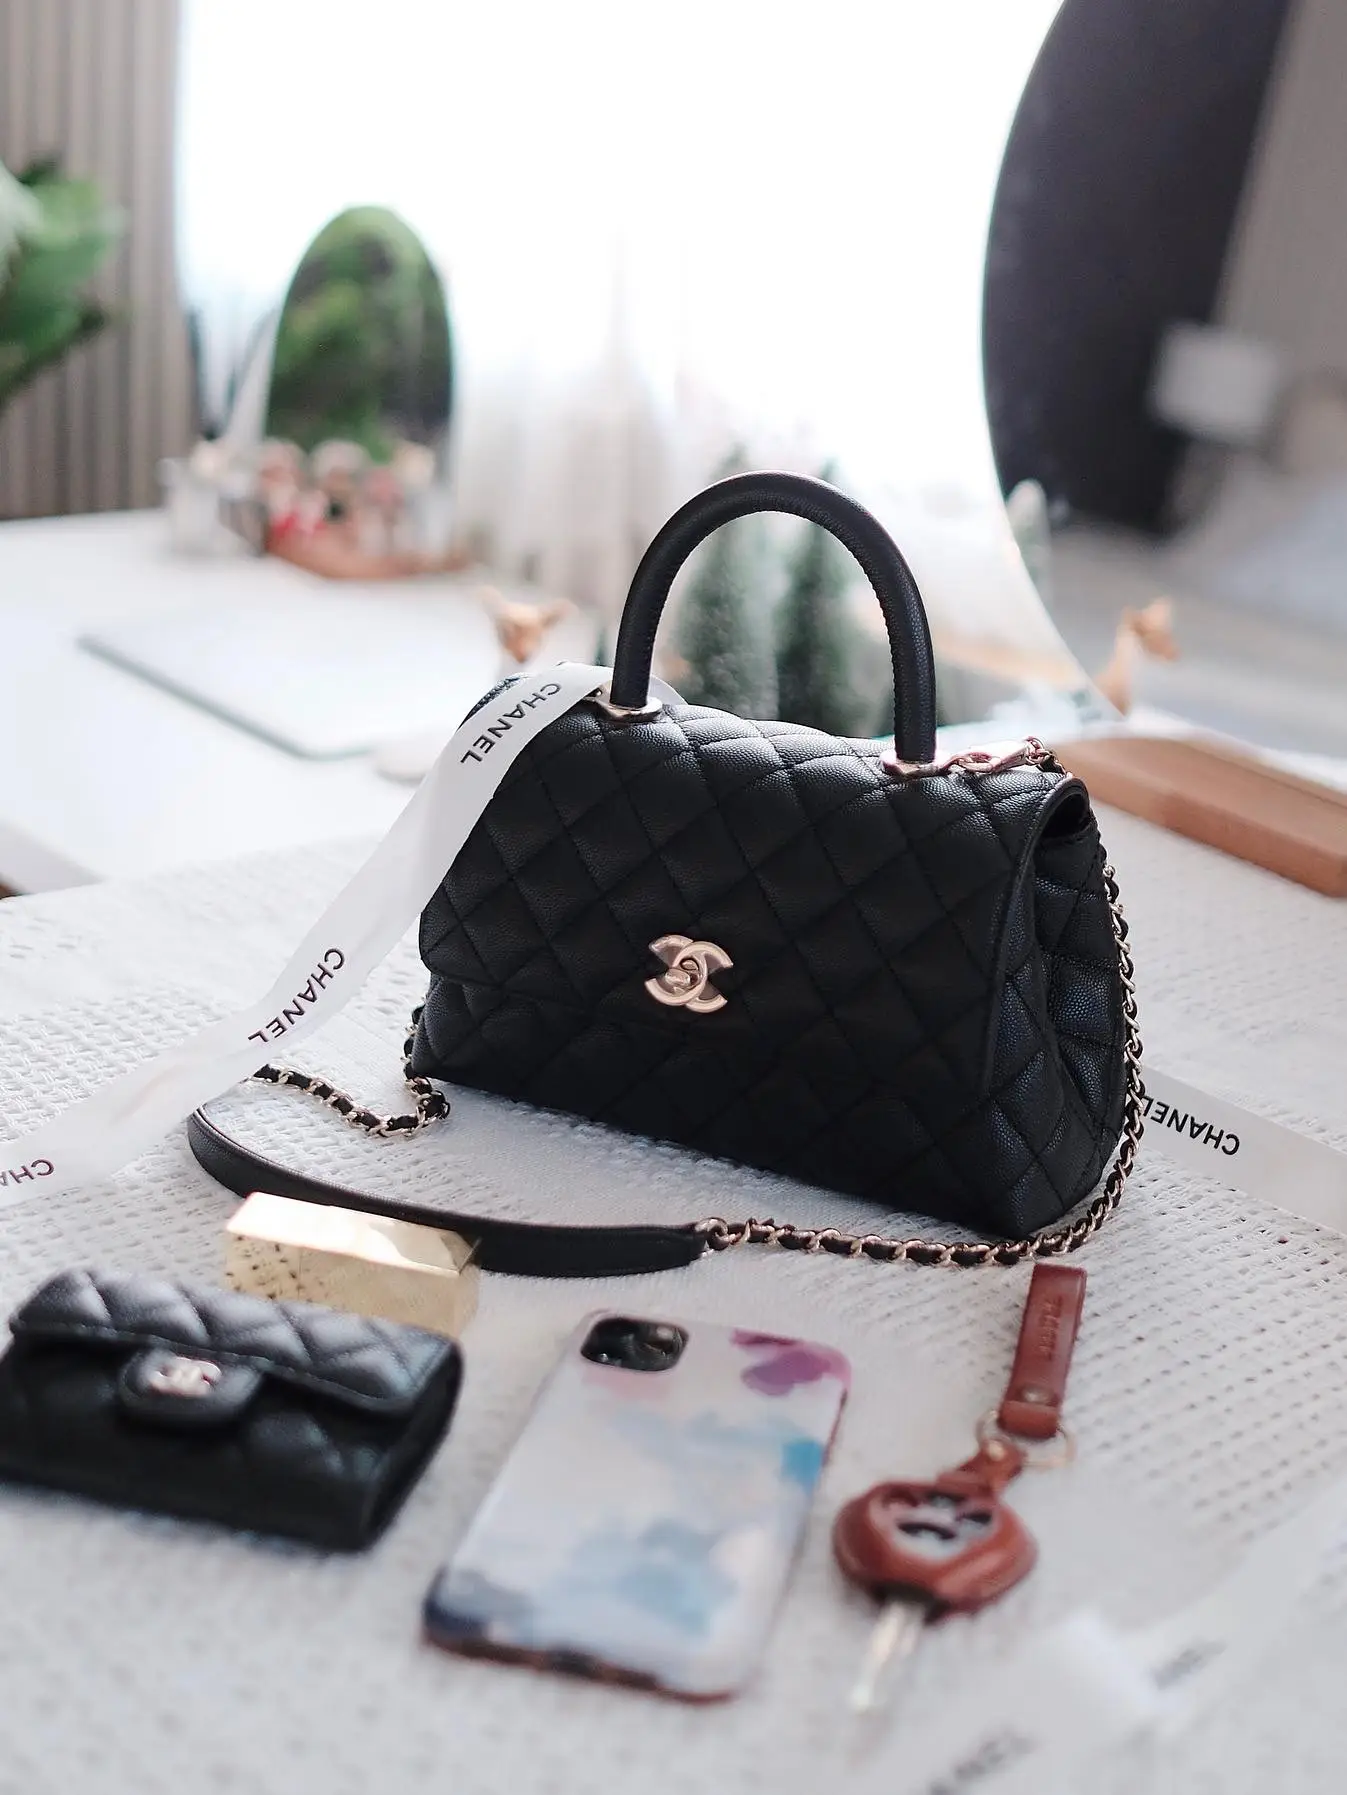 CHANEL COCO top handle • 10”, Gallery posted by Tipayarat_s